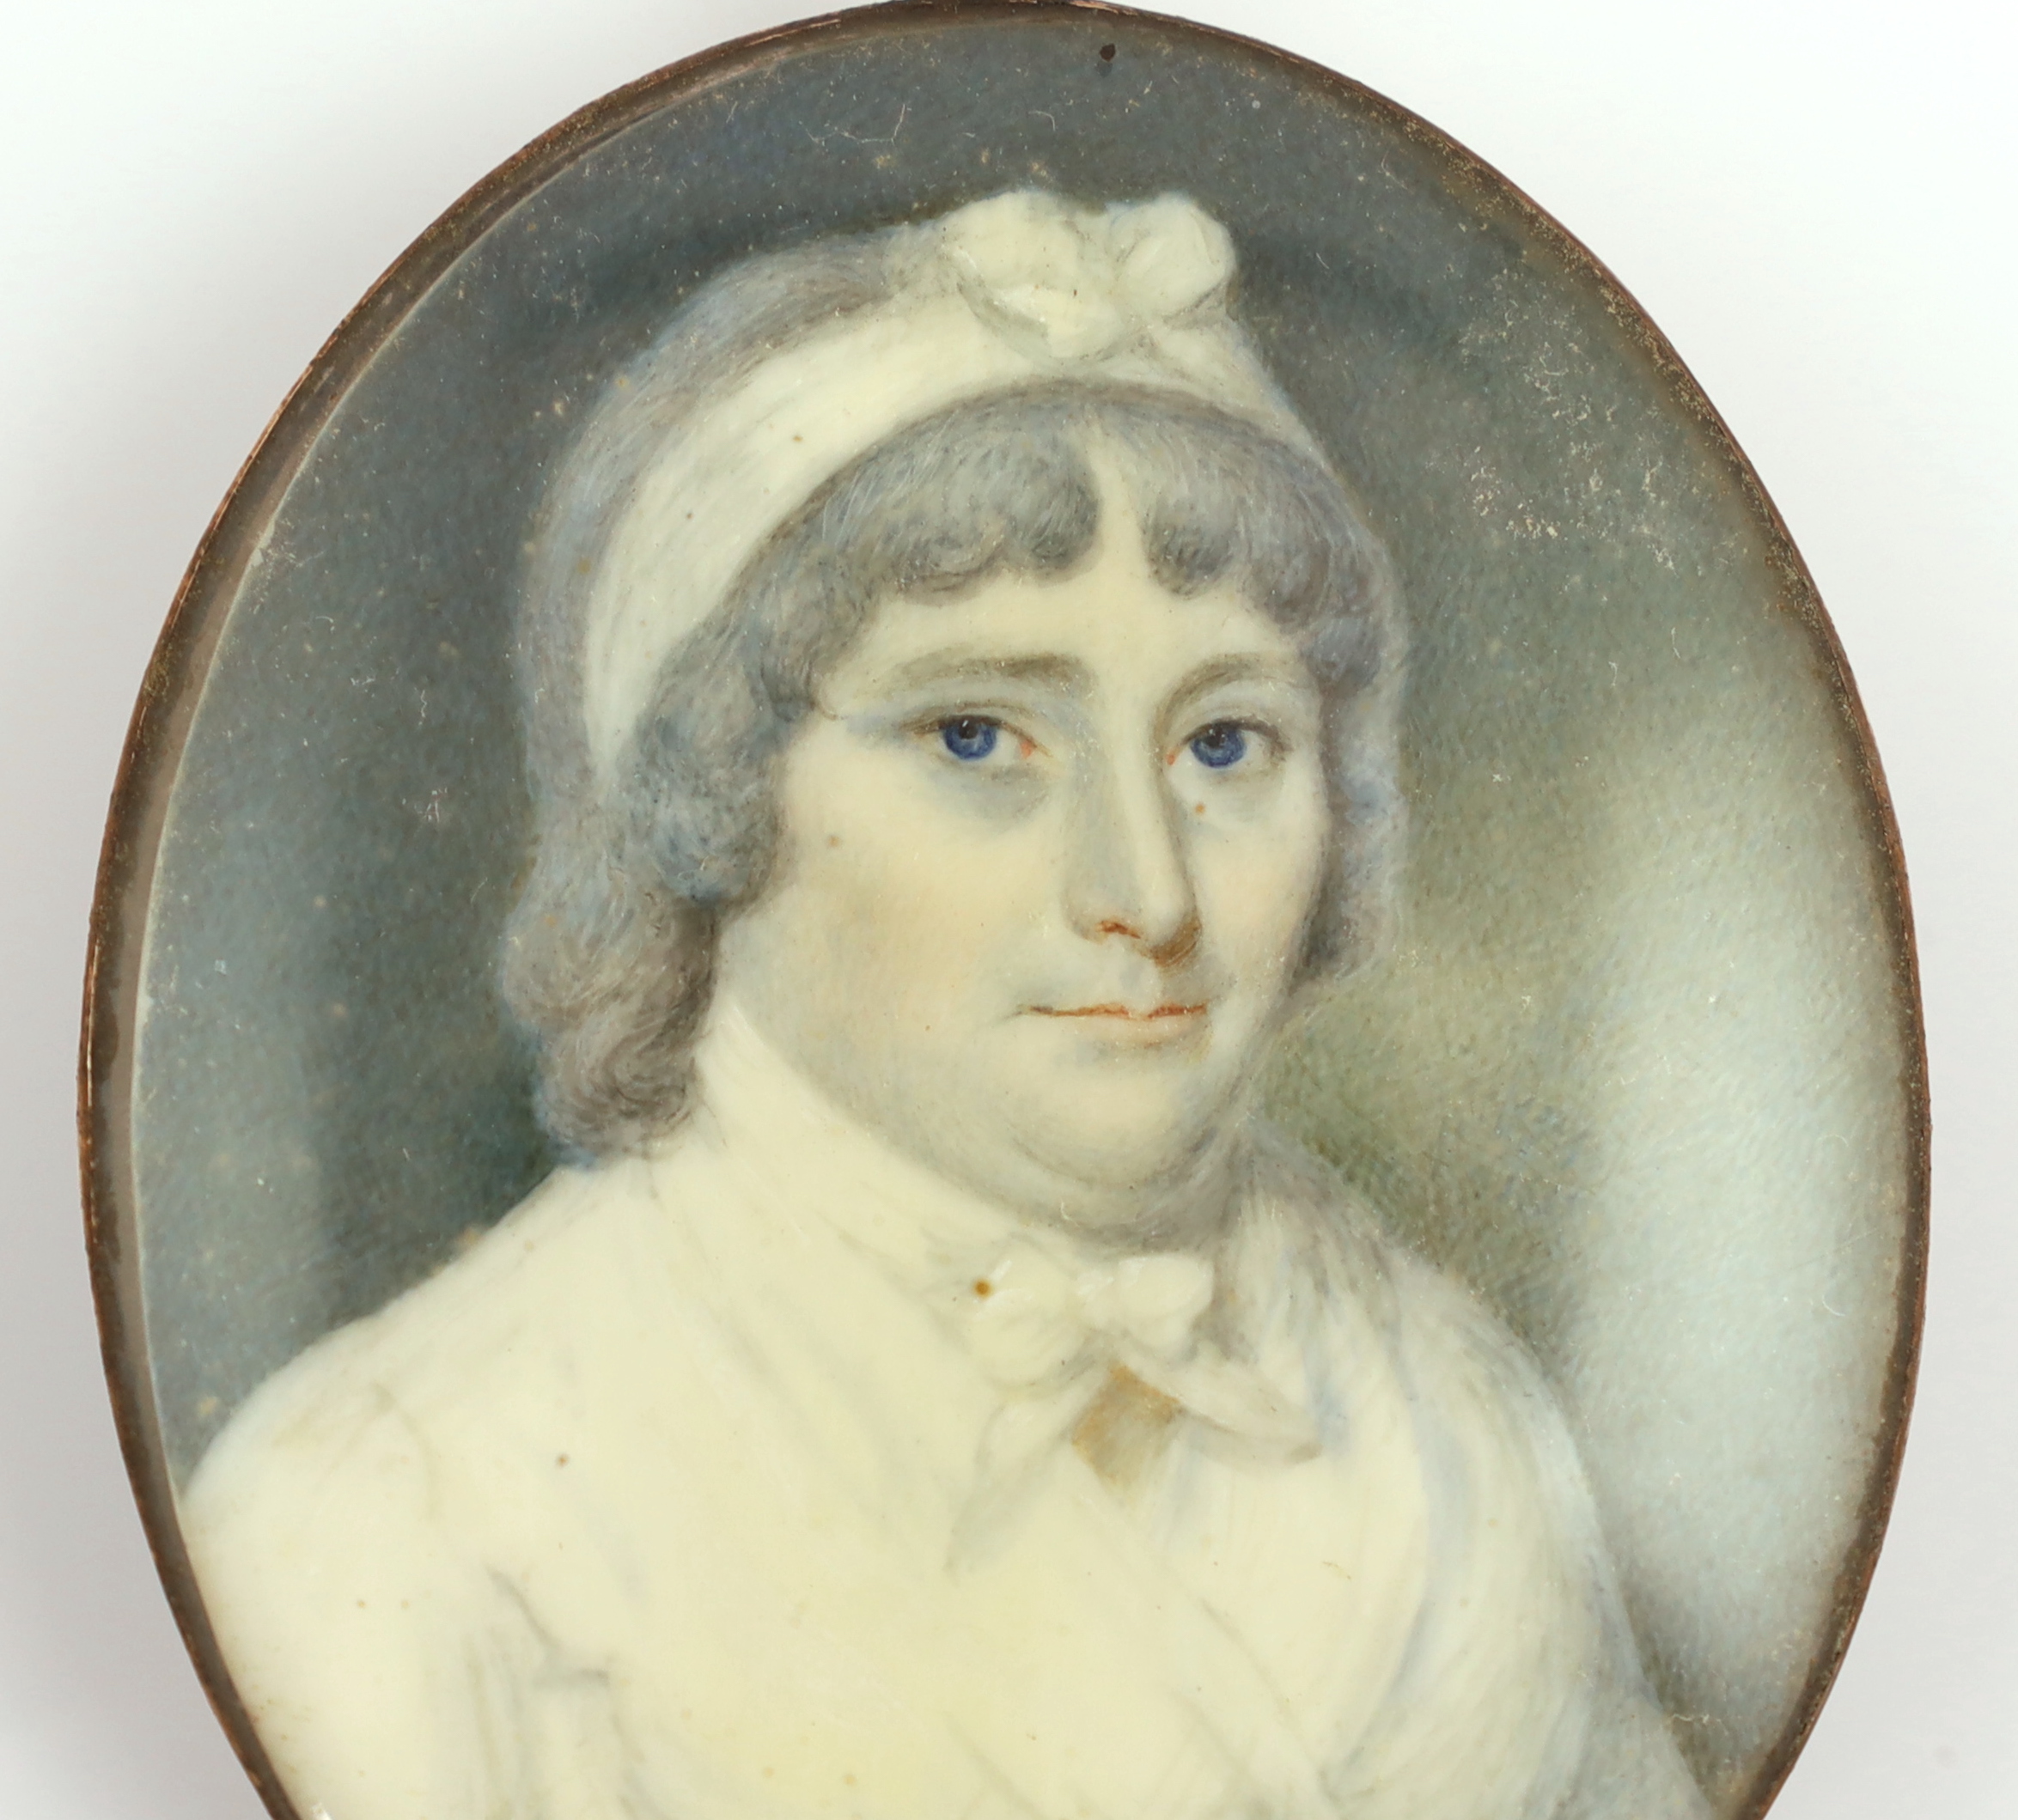 English School circa 1800, Portrait miniature of a lady, watercolour on ivory, 6.5 x 5.4cm. CITES Submission reference XDR2EDFW